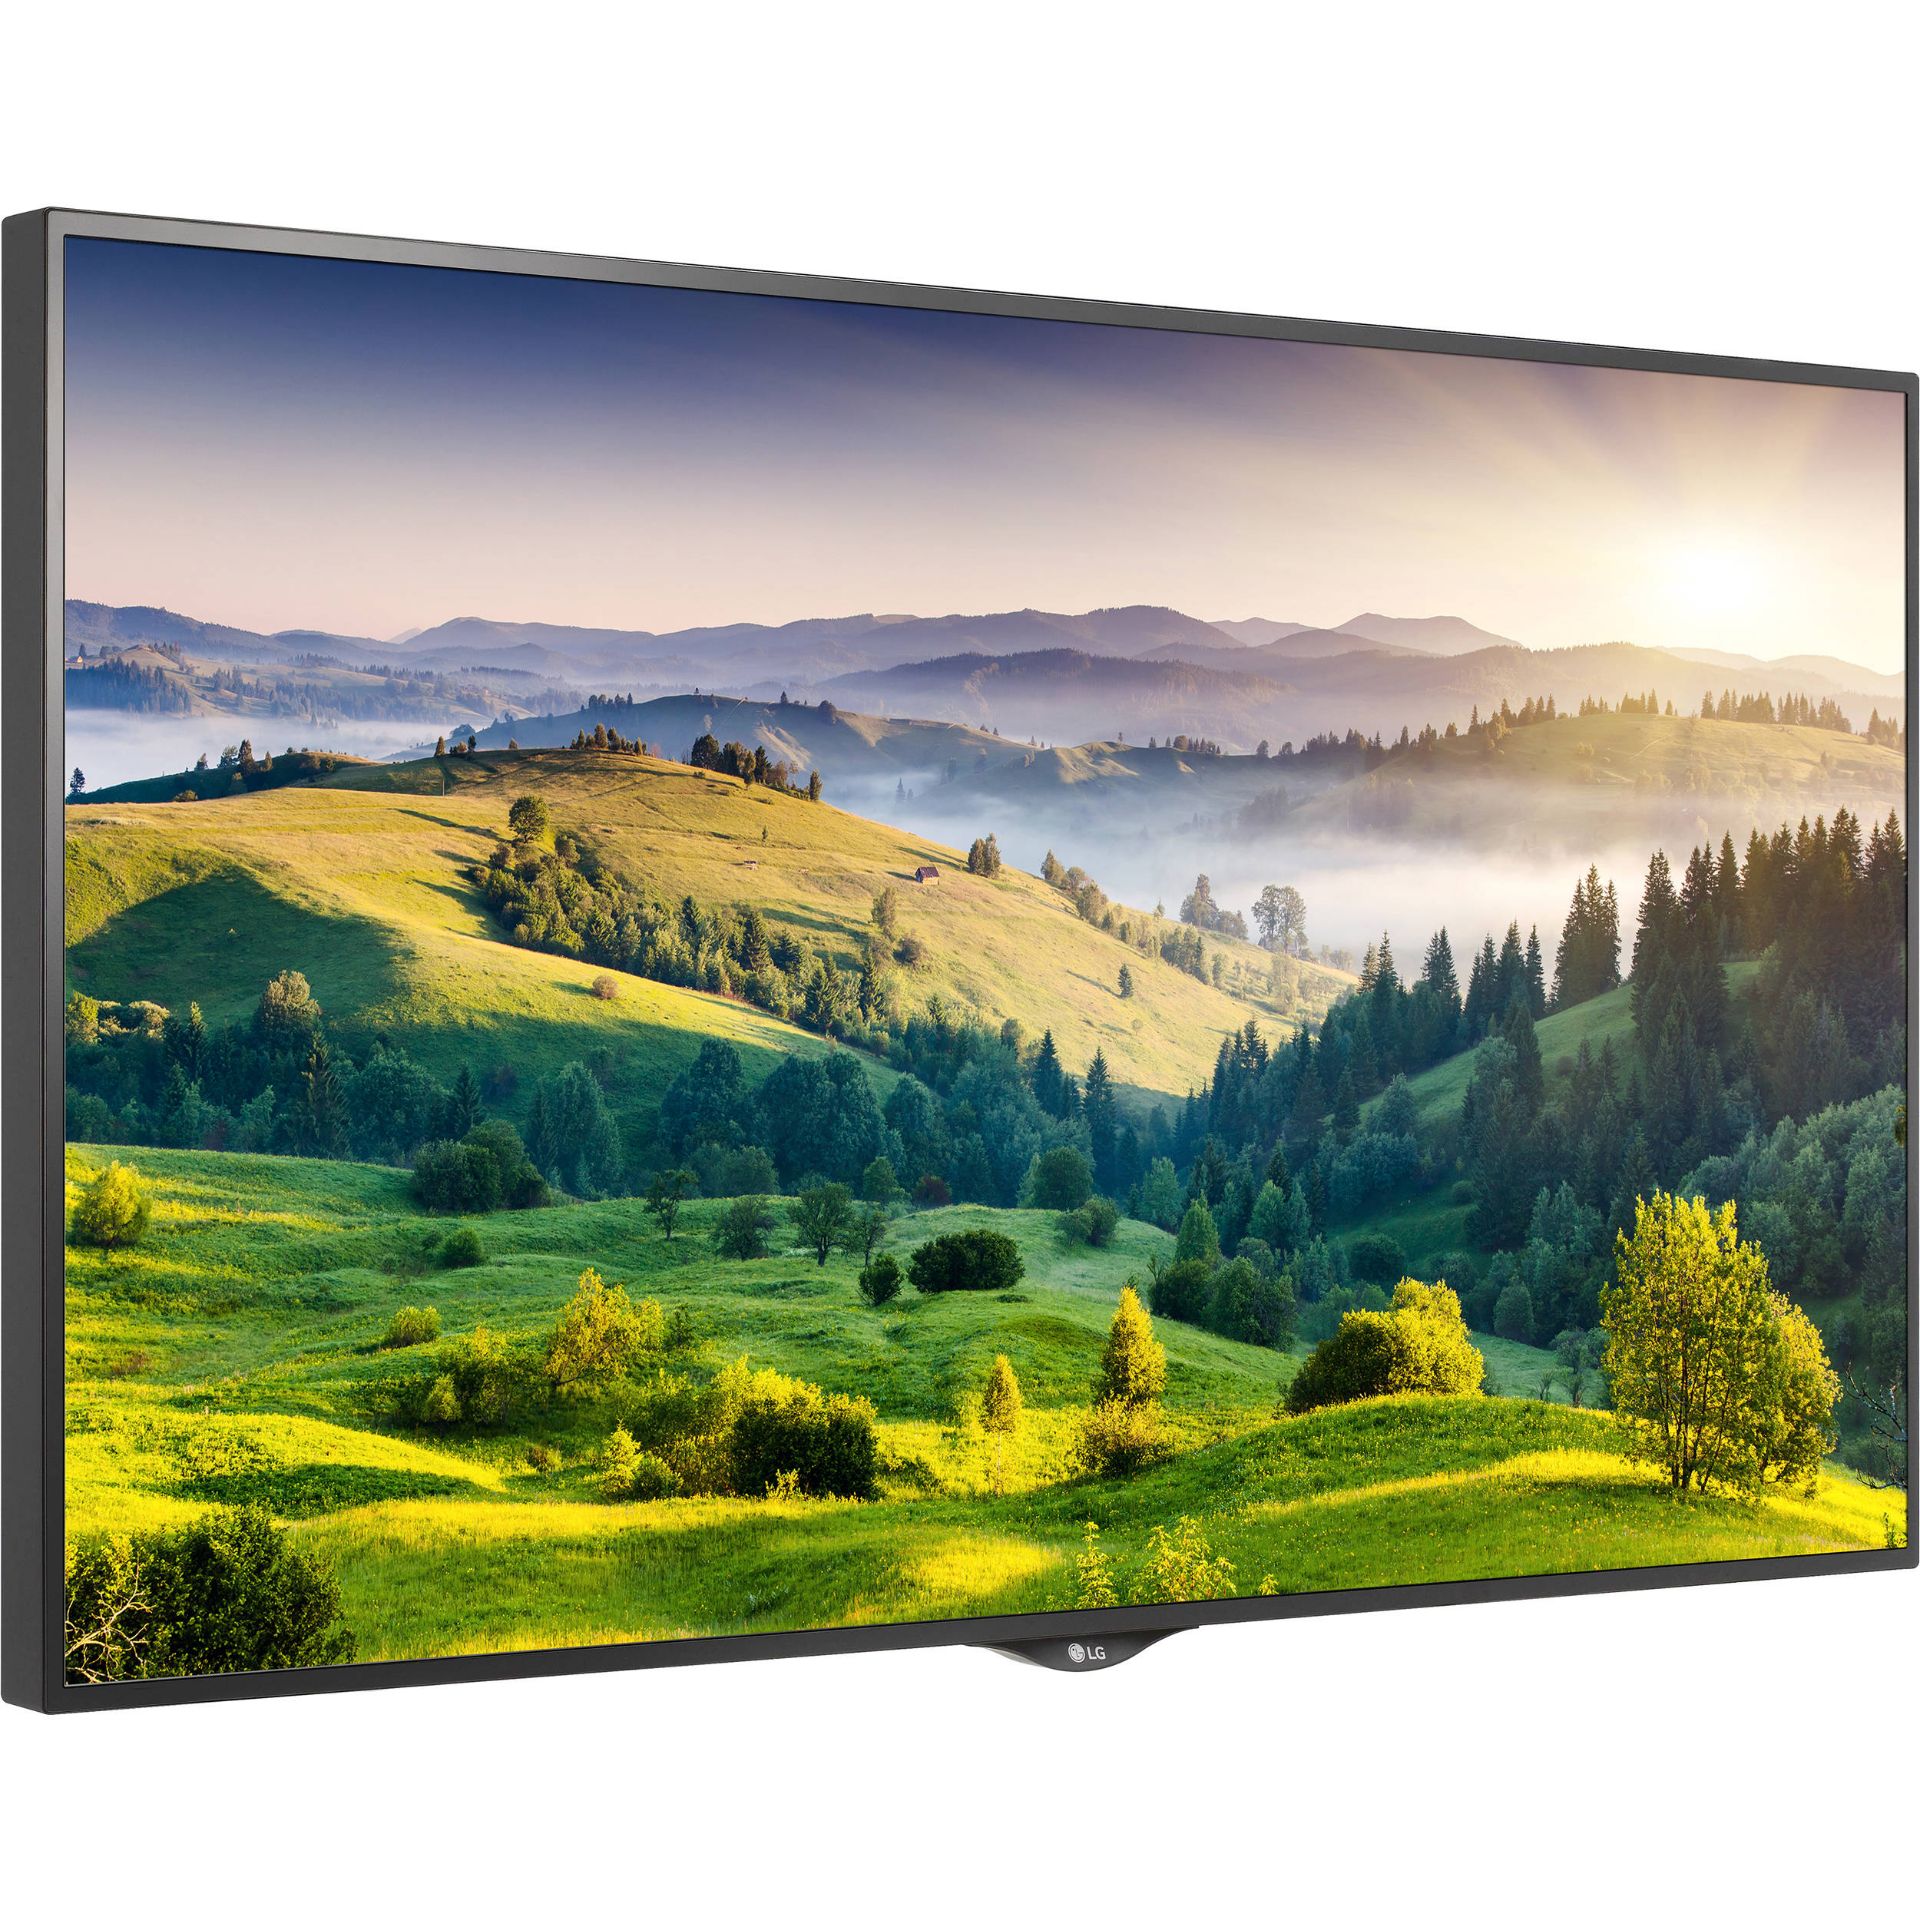 + VAT Grade A LG 55 Inch FULL HD IPS COMMERICAL DISPLAY MONITOR - ULTRA BRIGHT FOR OUTDOOR OR